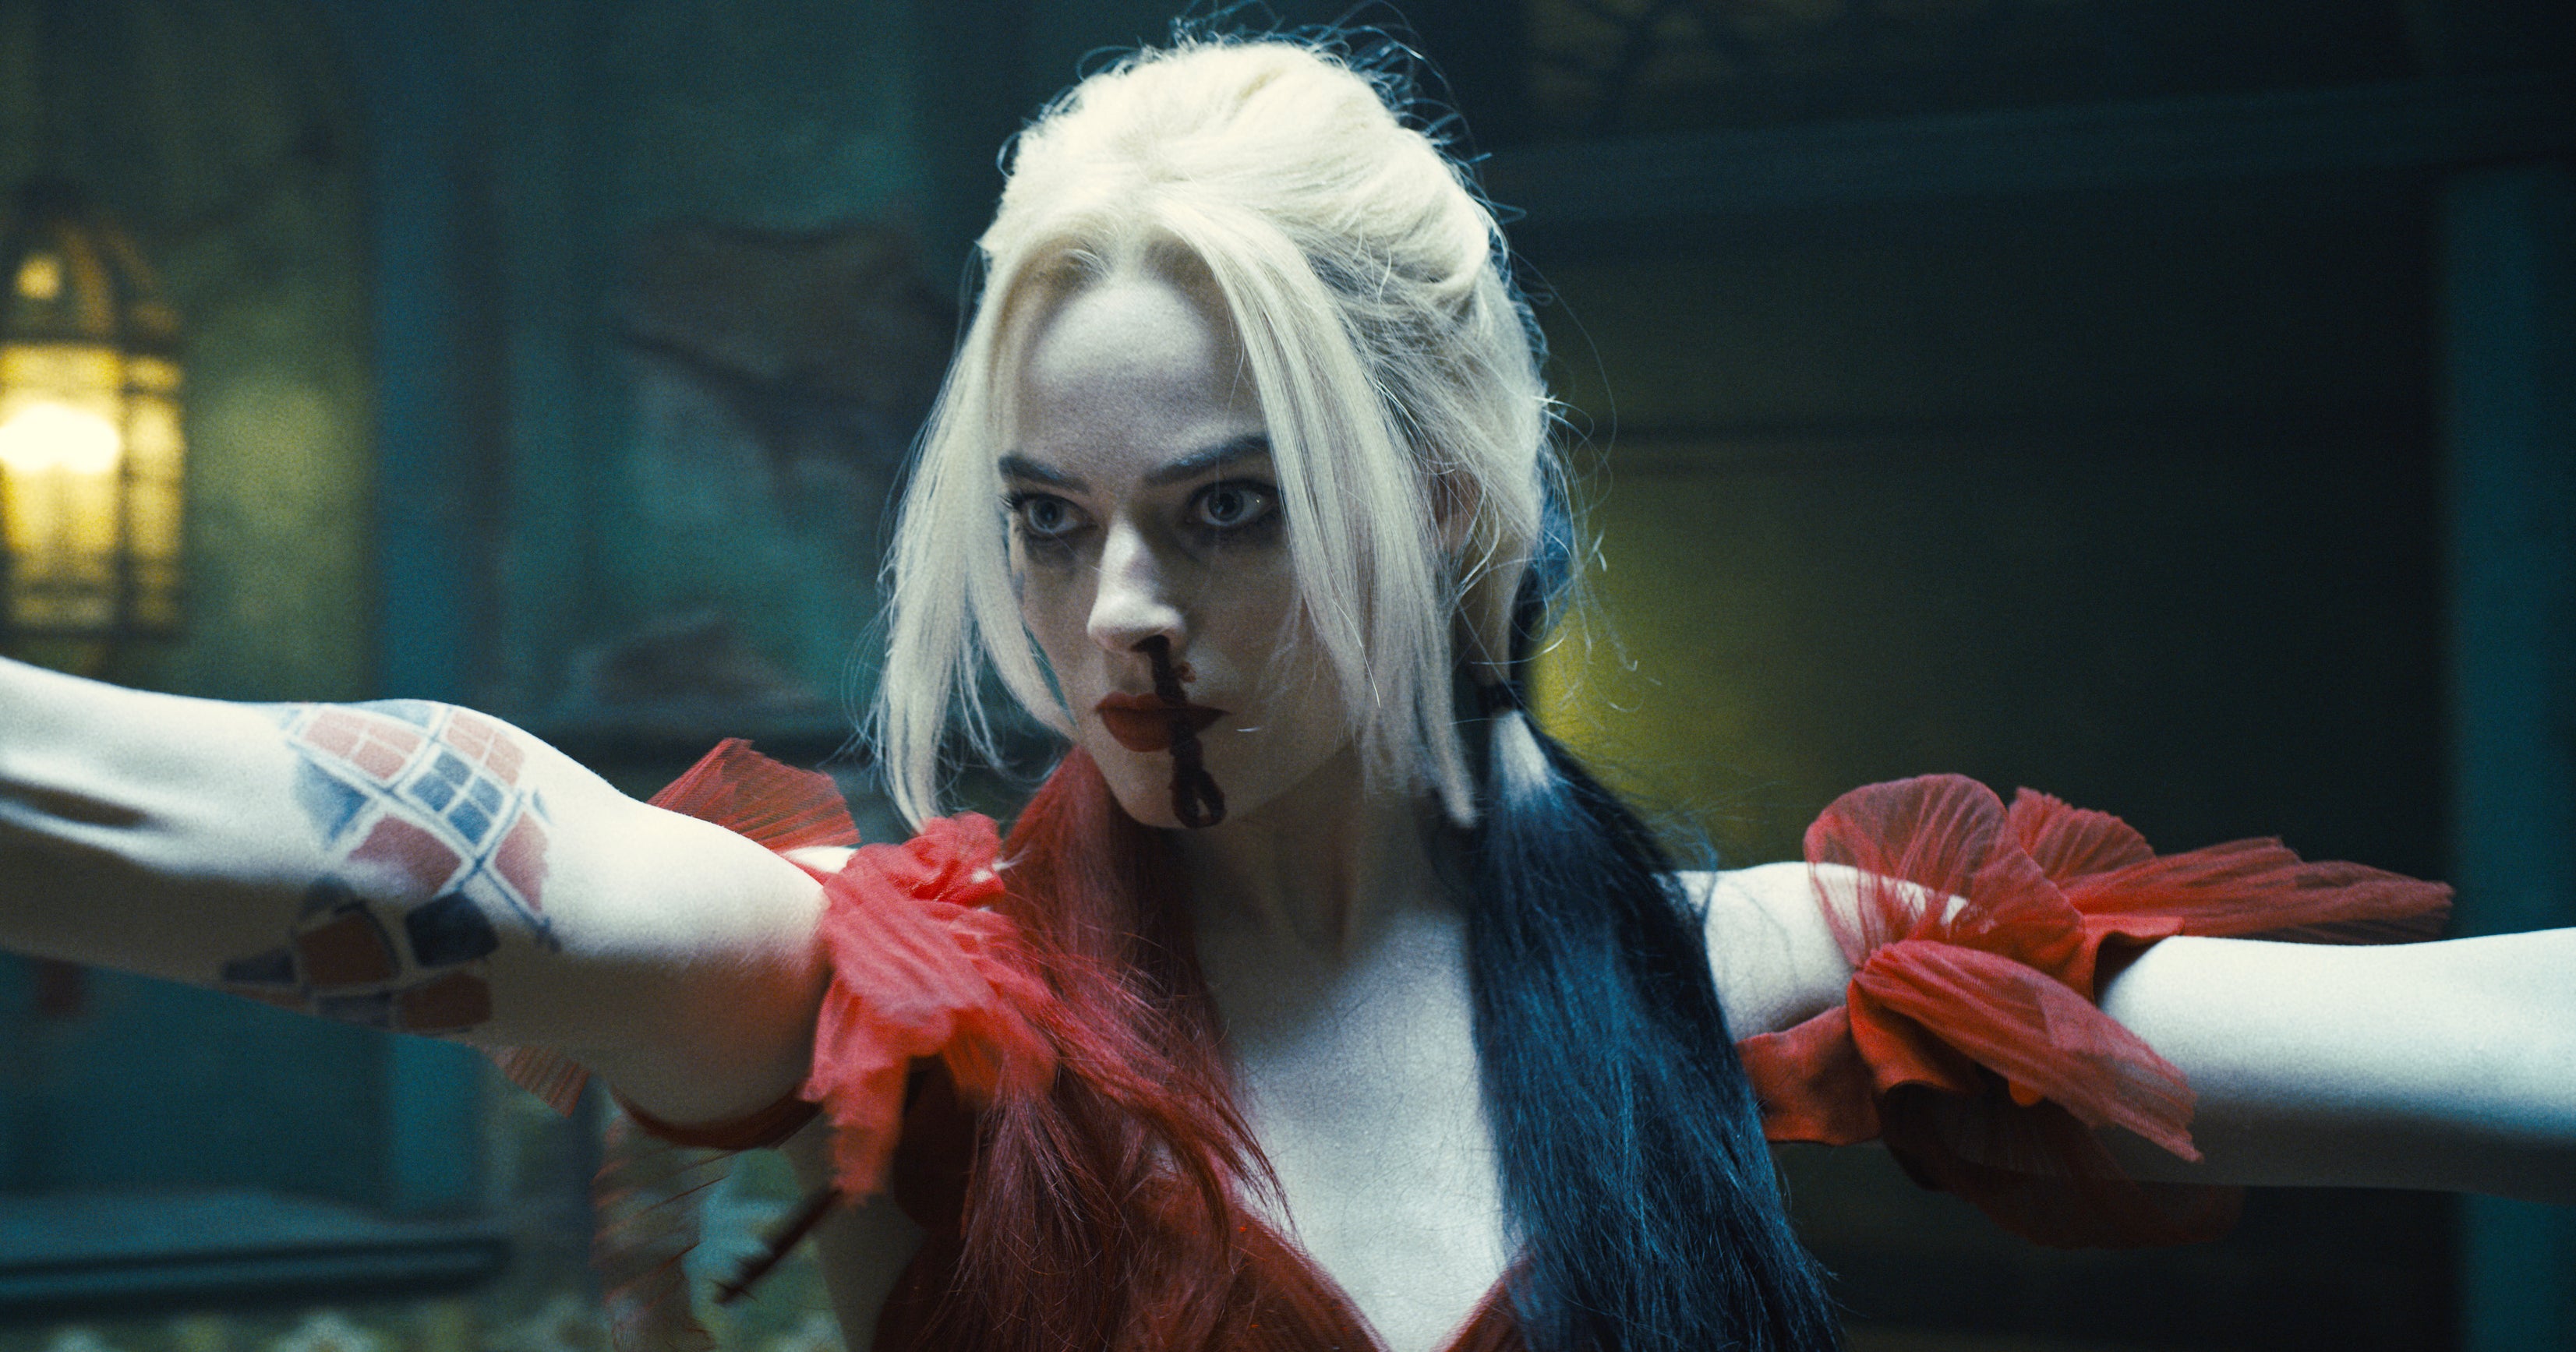 Best of Suicide squad topless